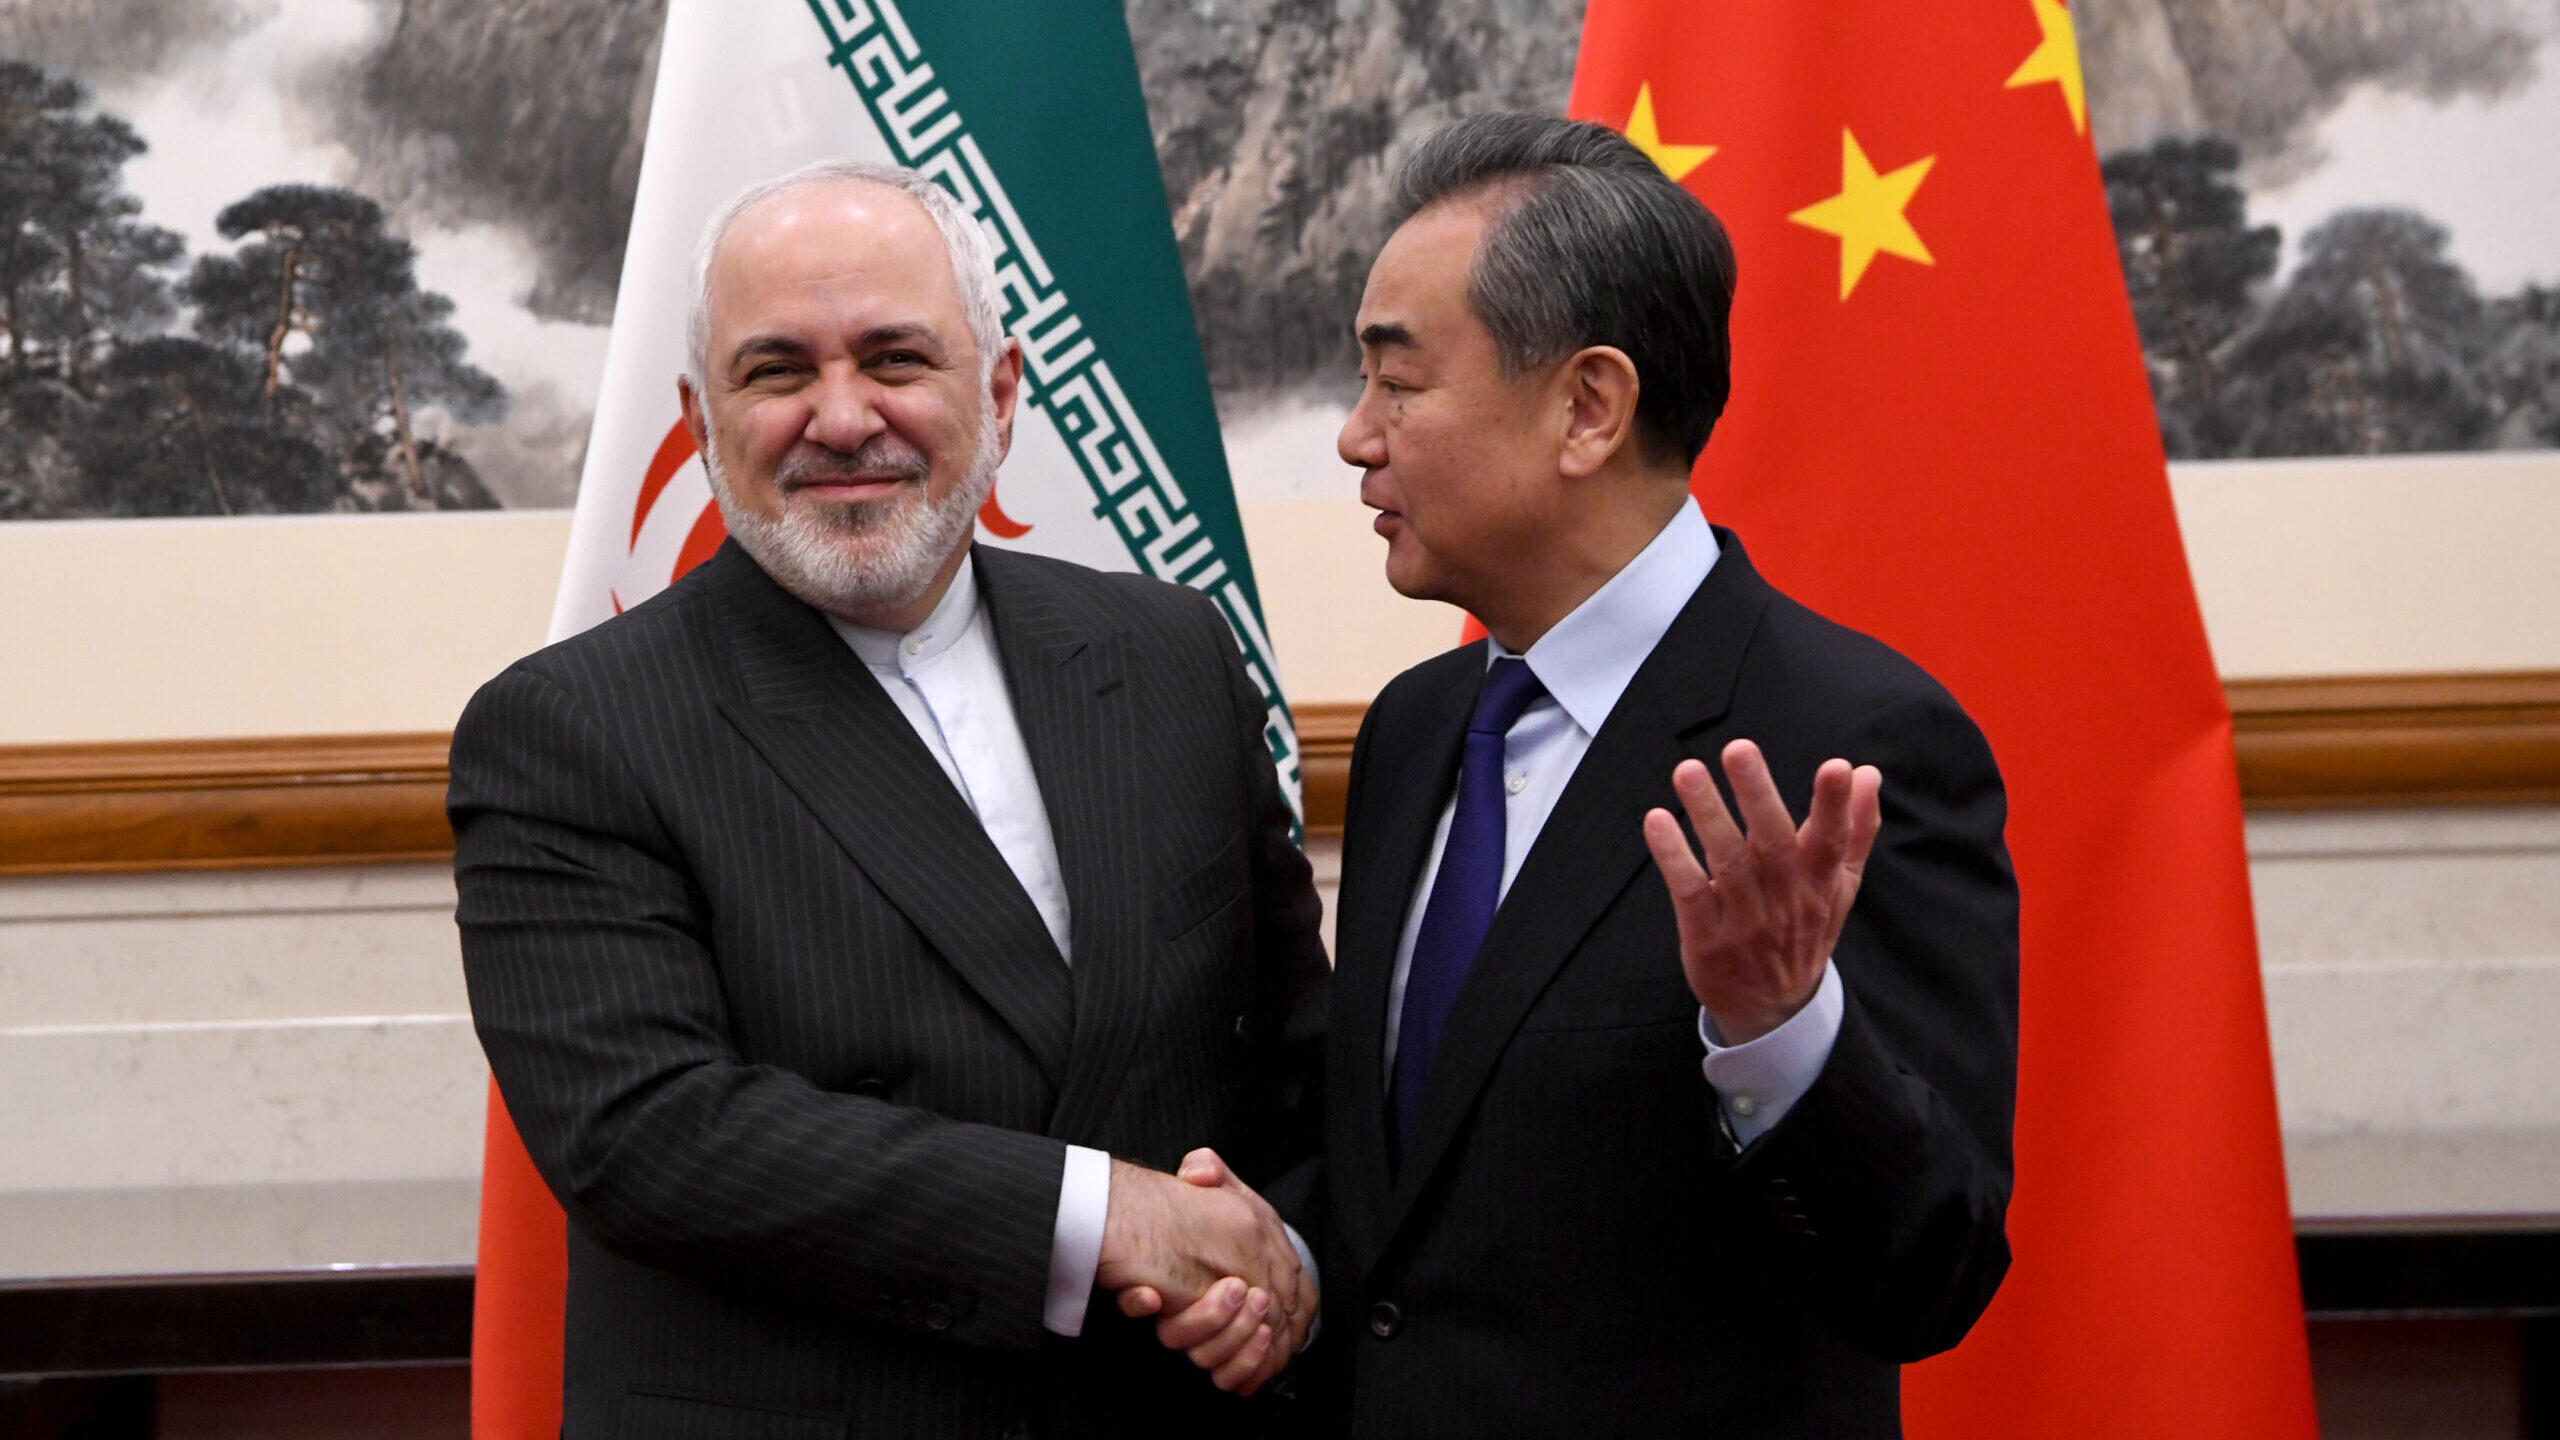 China Foreign Minister Wang Yi and Iran Foreign Minister Mohammad Javad Zarif Meet in Beijing